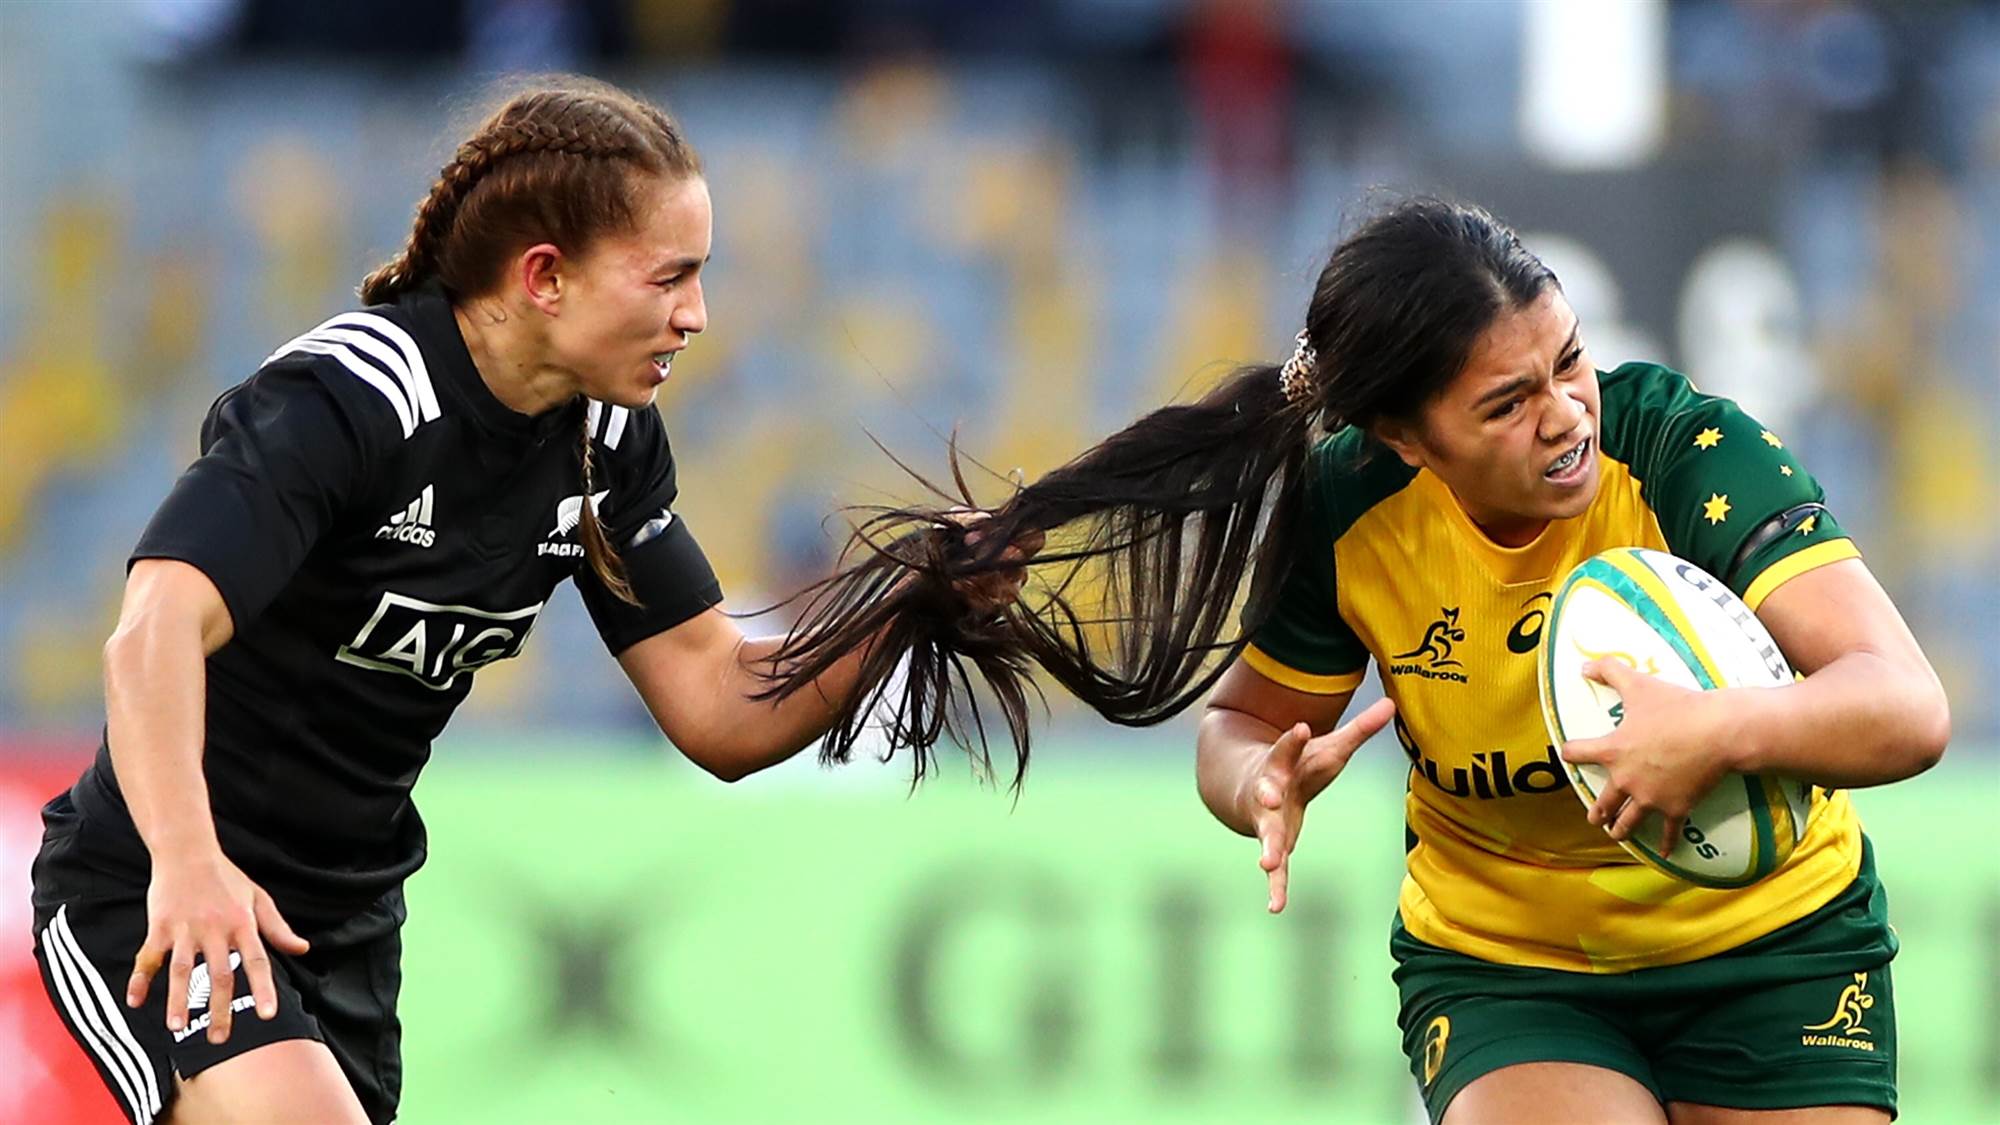 Official 2021 Rugby World Cup dates announced The Women